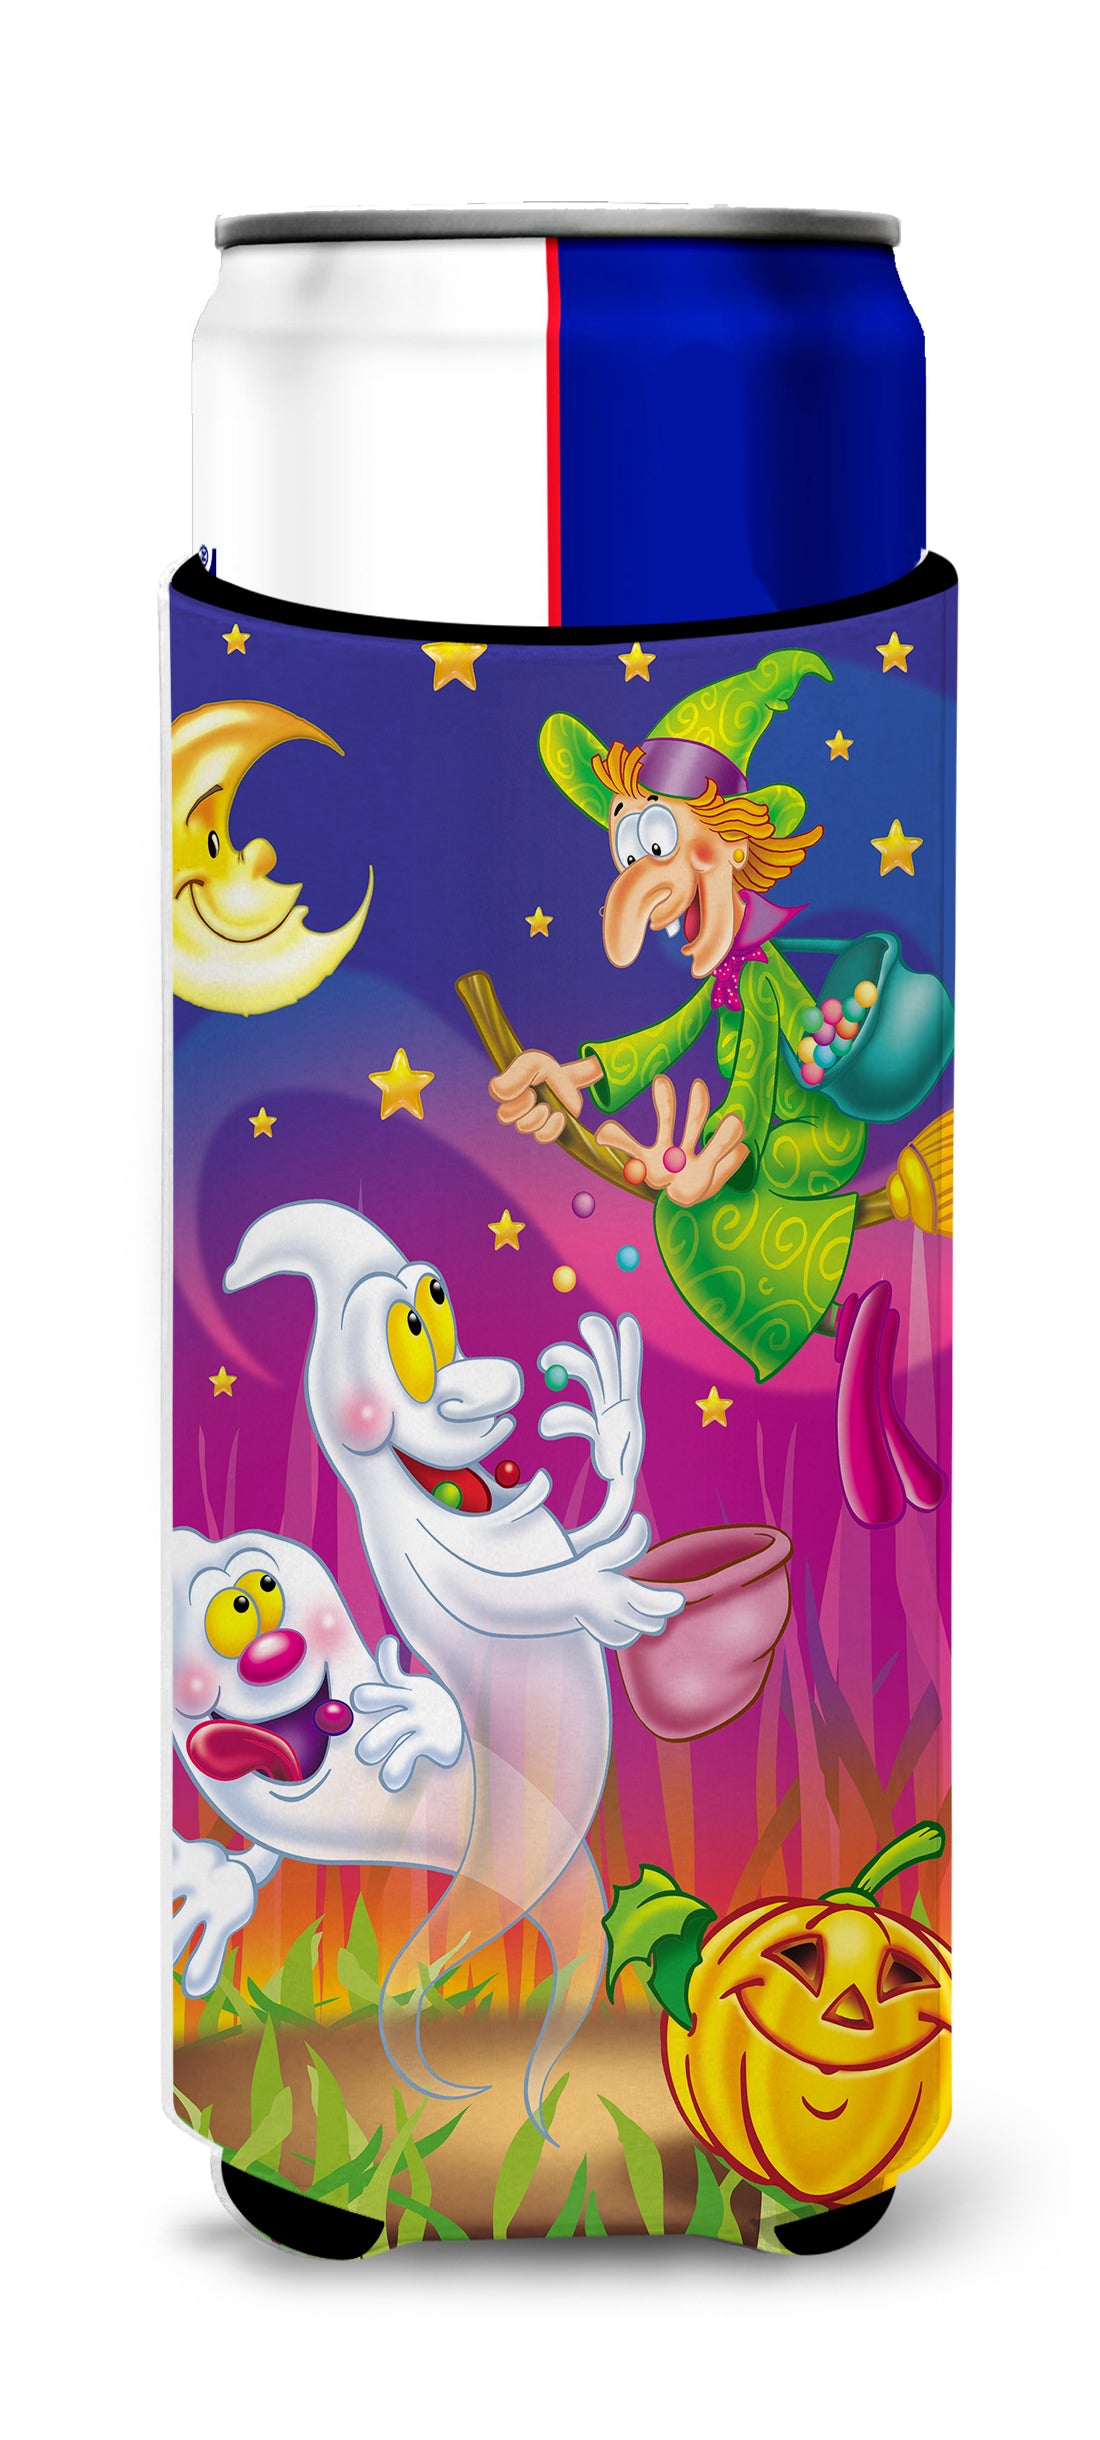 Witch and Ghosts Halloween Ultra Beverage Insulators for slim cans APH3799MUK